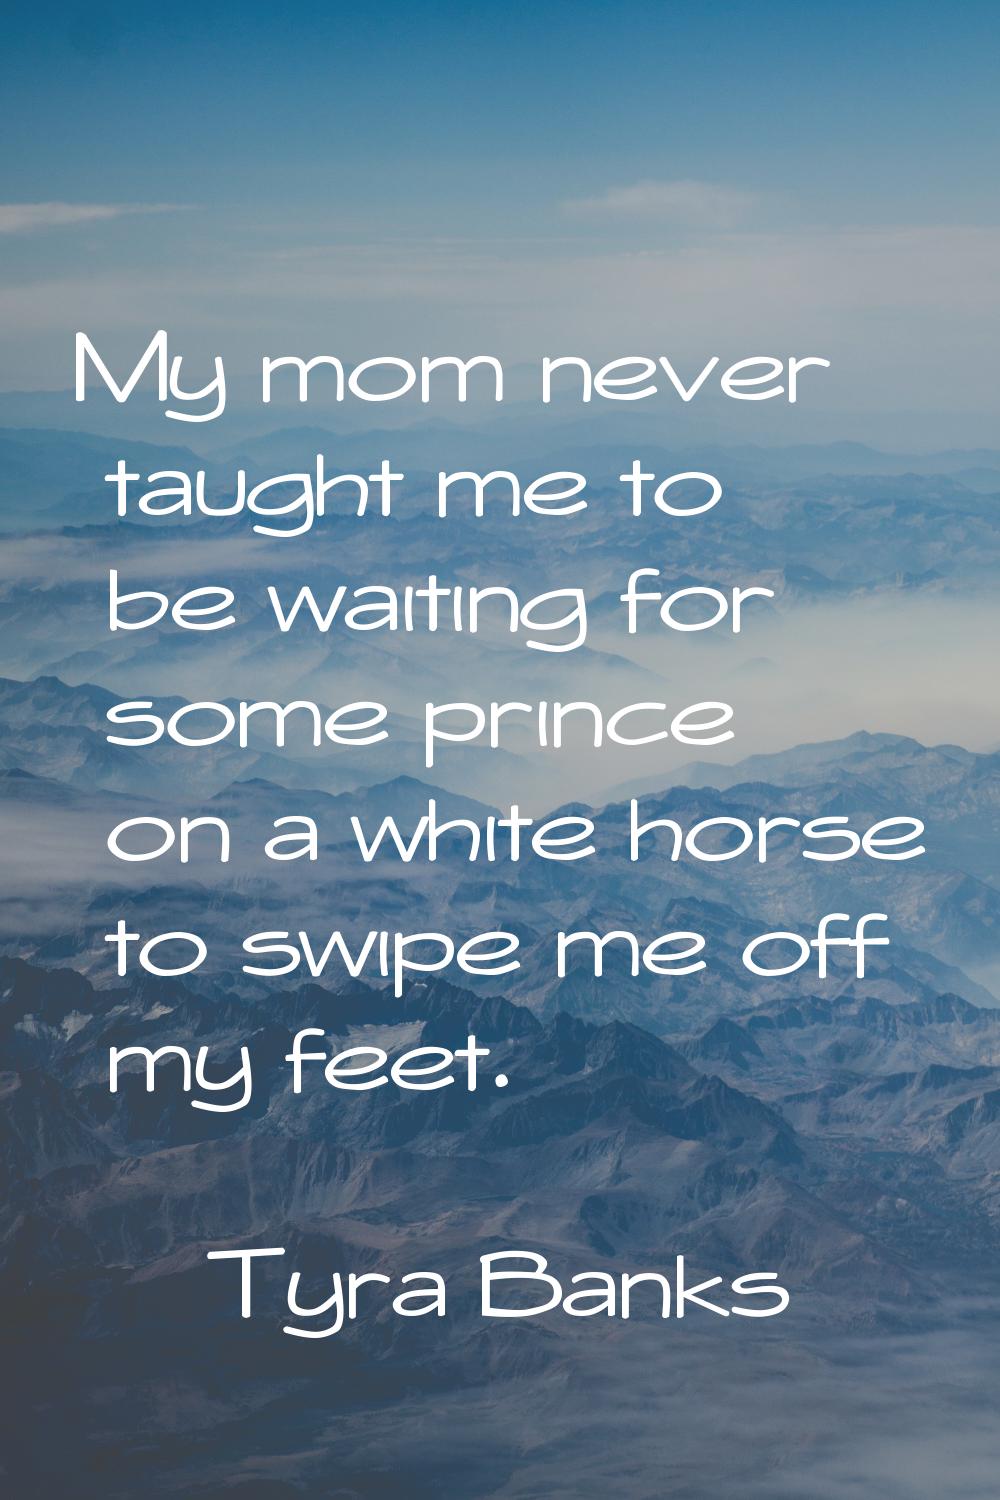 My mom never taught me to be waiting for some prince on a white horse to swipe me off my feet.